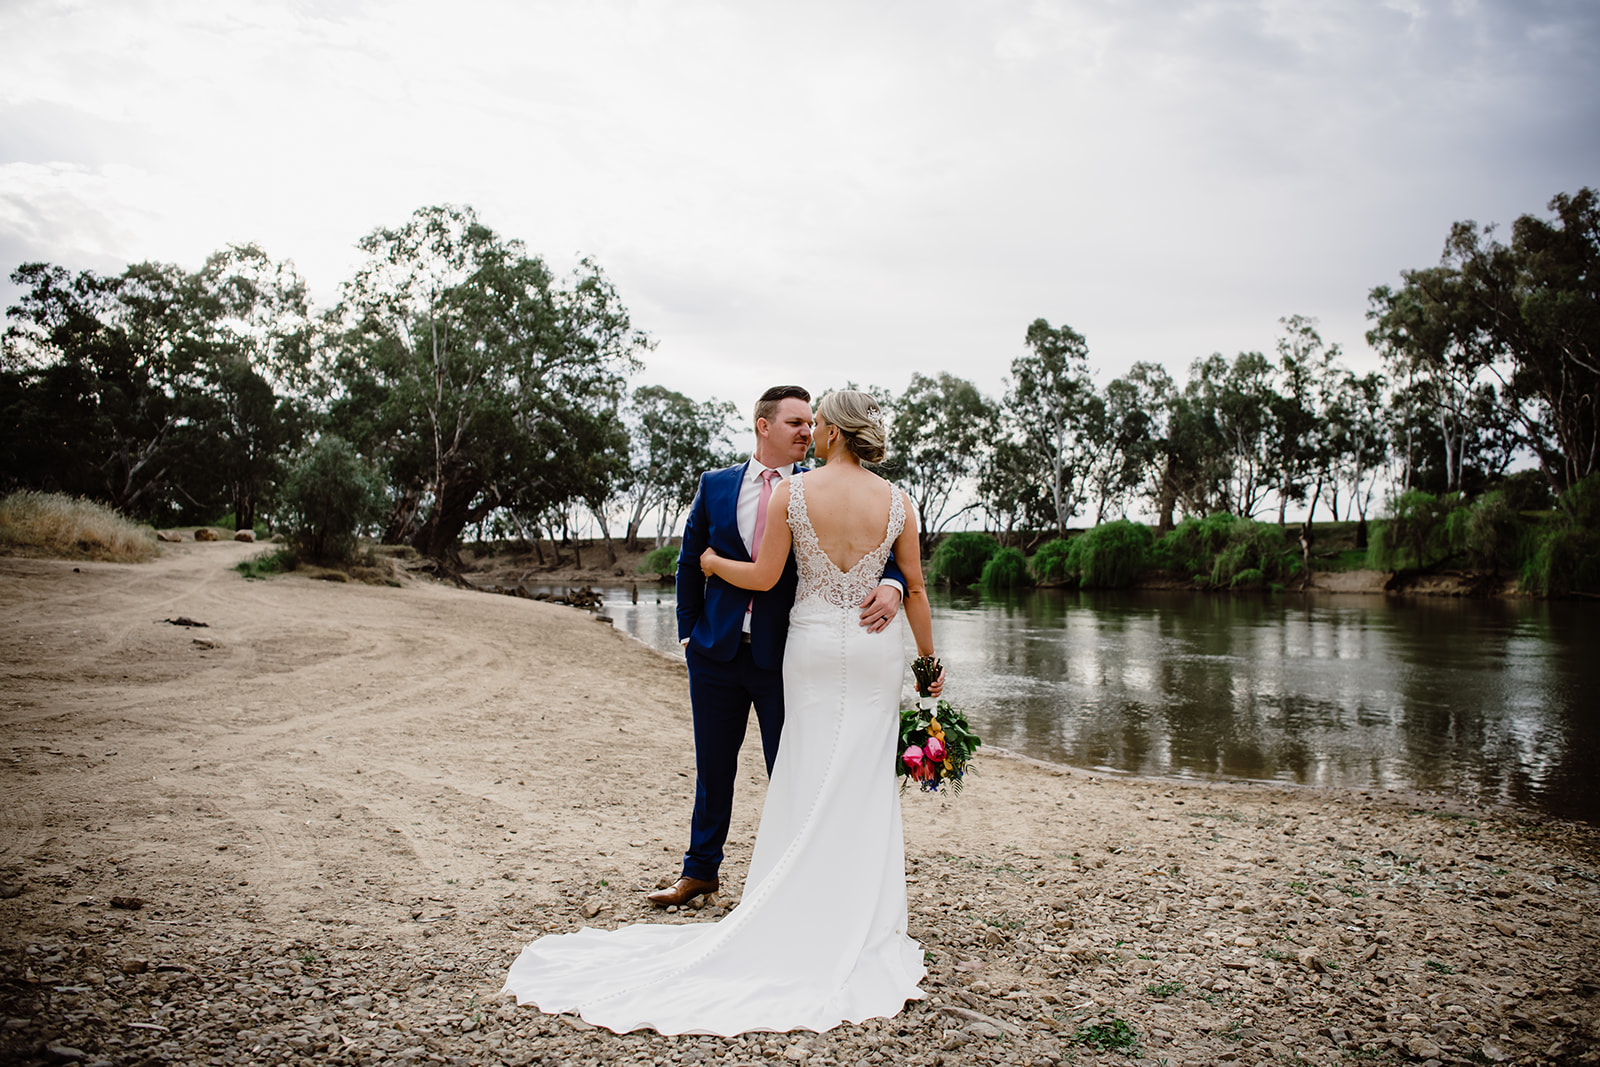 Bride and groom photo by the lake at Wagga Wagga Country Club. Wedding photo by the lake at Wagga Country Club.